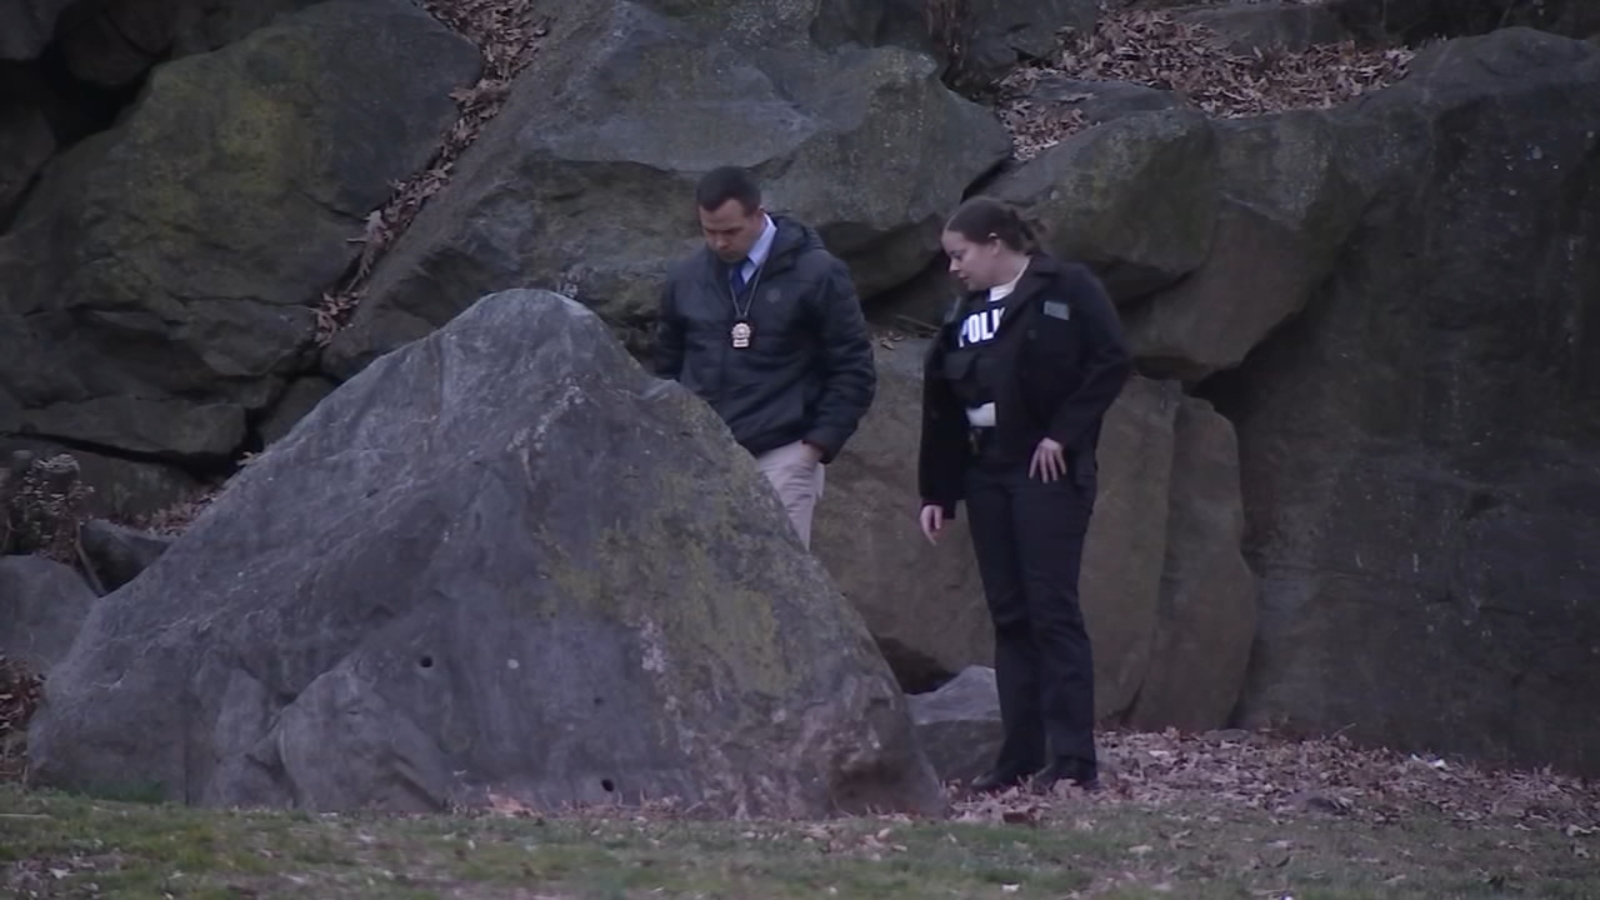  Investigation underway after woman found fatally stabbed in Wilmington park 